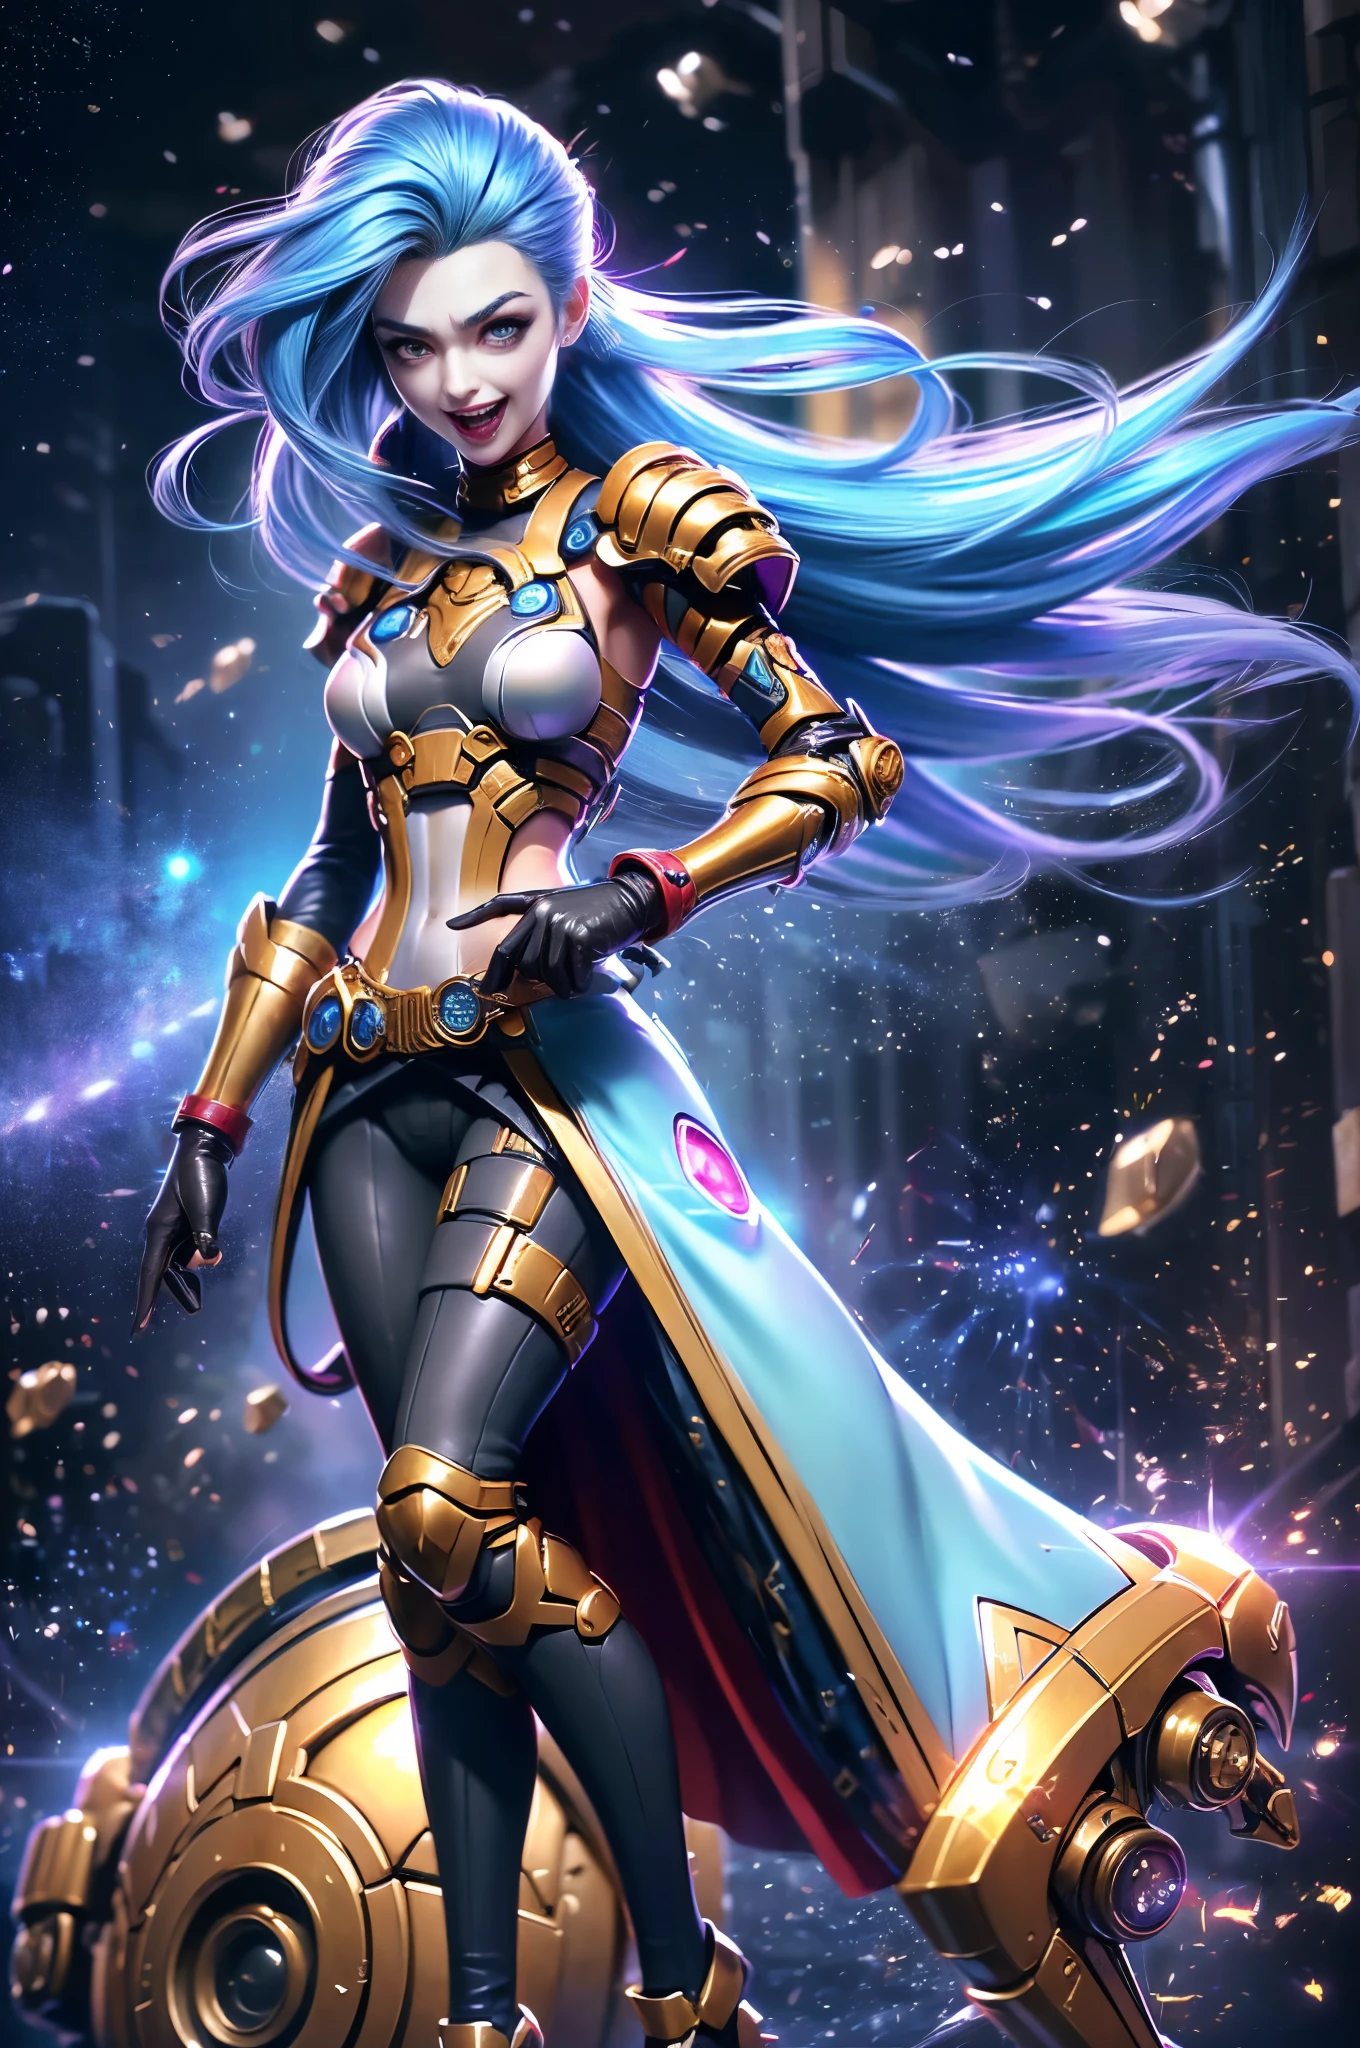 (Long-range shooting: 1.5), jinx \(league of legends\), (1girl，League of Legends Jinx)，(Scarlet eyes: 1.2, crazy laughter, Blue double ponytail hair: 1.5)，Kungfu，Wearing future technology mechanical armor，(Holding a particle laser cannon in hand，a revolver)，Aoshu crystal, Attack status，(Snowy mountain woods，surrounded by rain，League of Legends Game World)，Illustration style，The whole body is exposed to the rain for a long time，(exquisite facial features，Perfect hand featureartial arts style，(Selective focusing，full body shot of，tmasterpiece，ultra - detailed，Epic work，highest  quality，8k，panorama, first-person view, atmospheric perspective, UHD, masterpiece, ccurate, anatomically correct, textured skin, high details, award winning, best quality), jinxlol, bydylankowalski